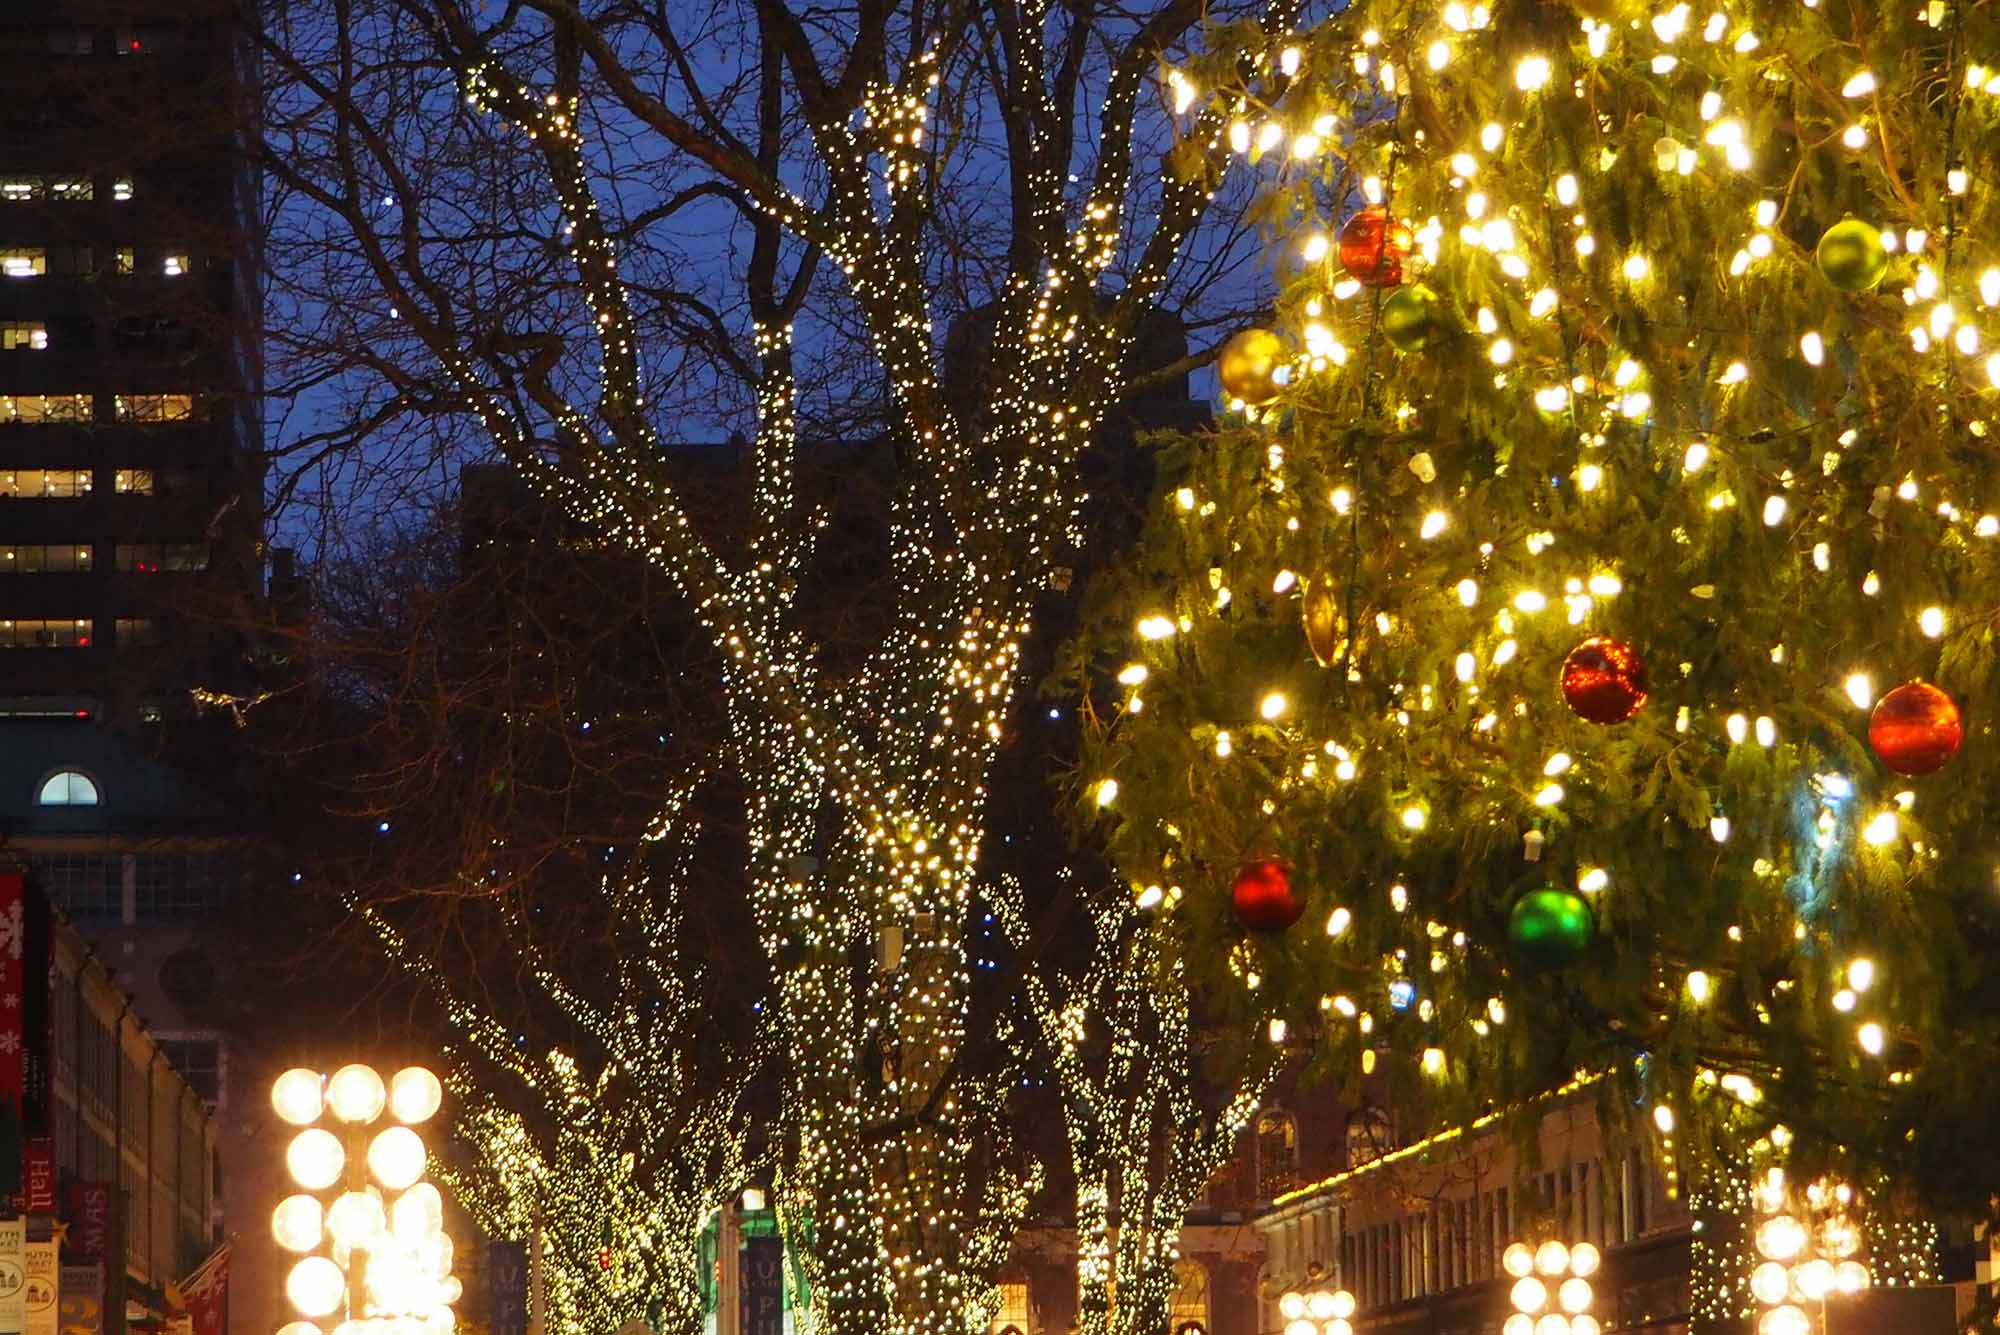 Photo: Trees covered in Bright yellow Christmas lights are shown on a dark night scene in a city. One of the trees features red, yellow, and green Christmas ornaments.